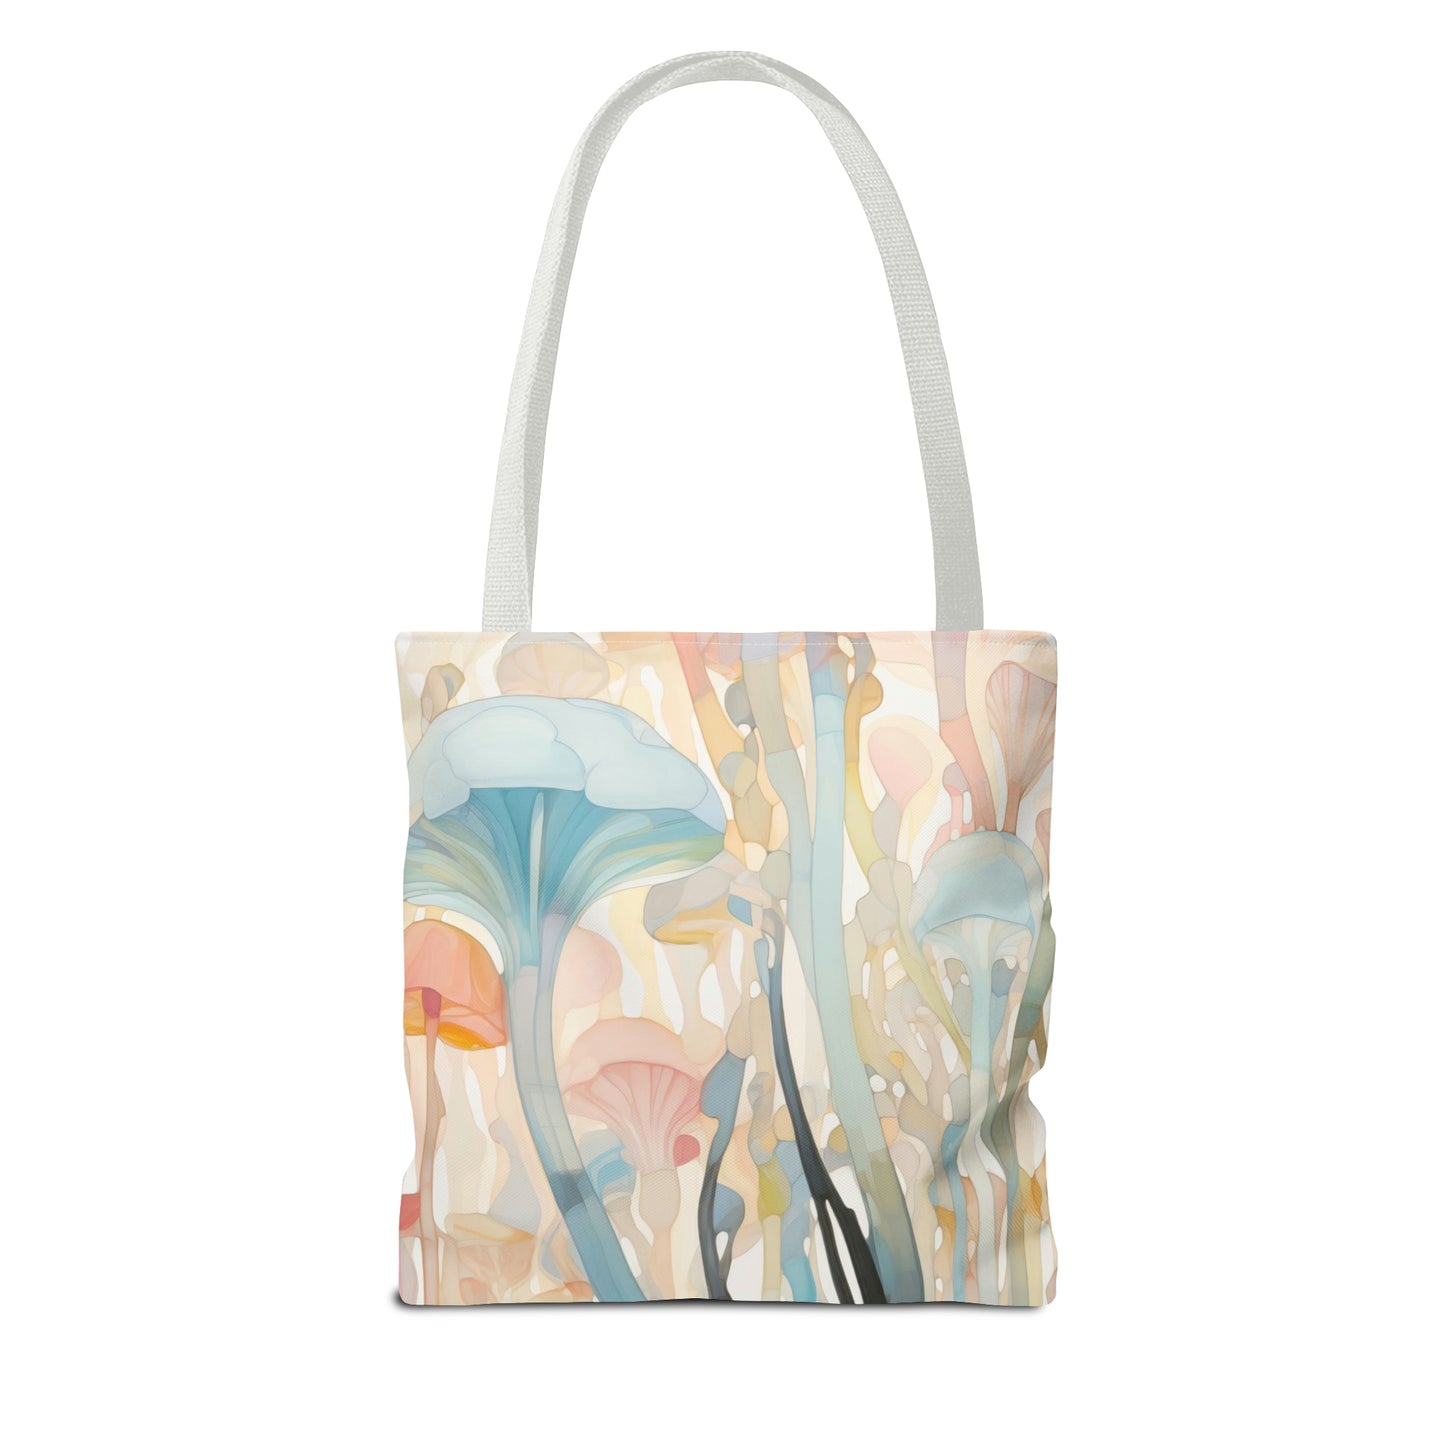 Groovy Rainbow Mushrooms Stained Glass Tote Bag